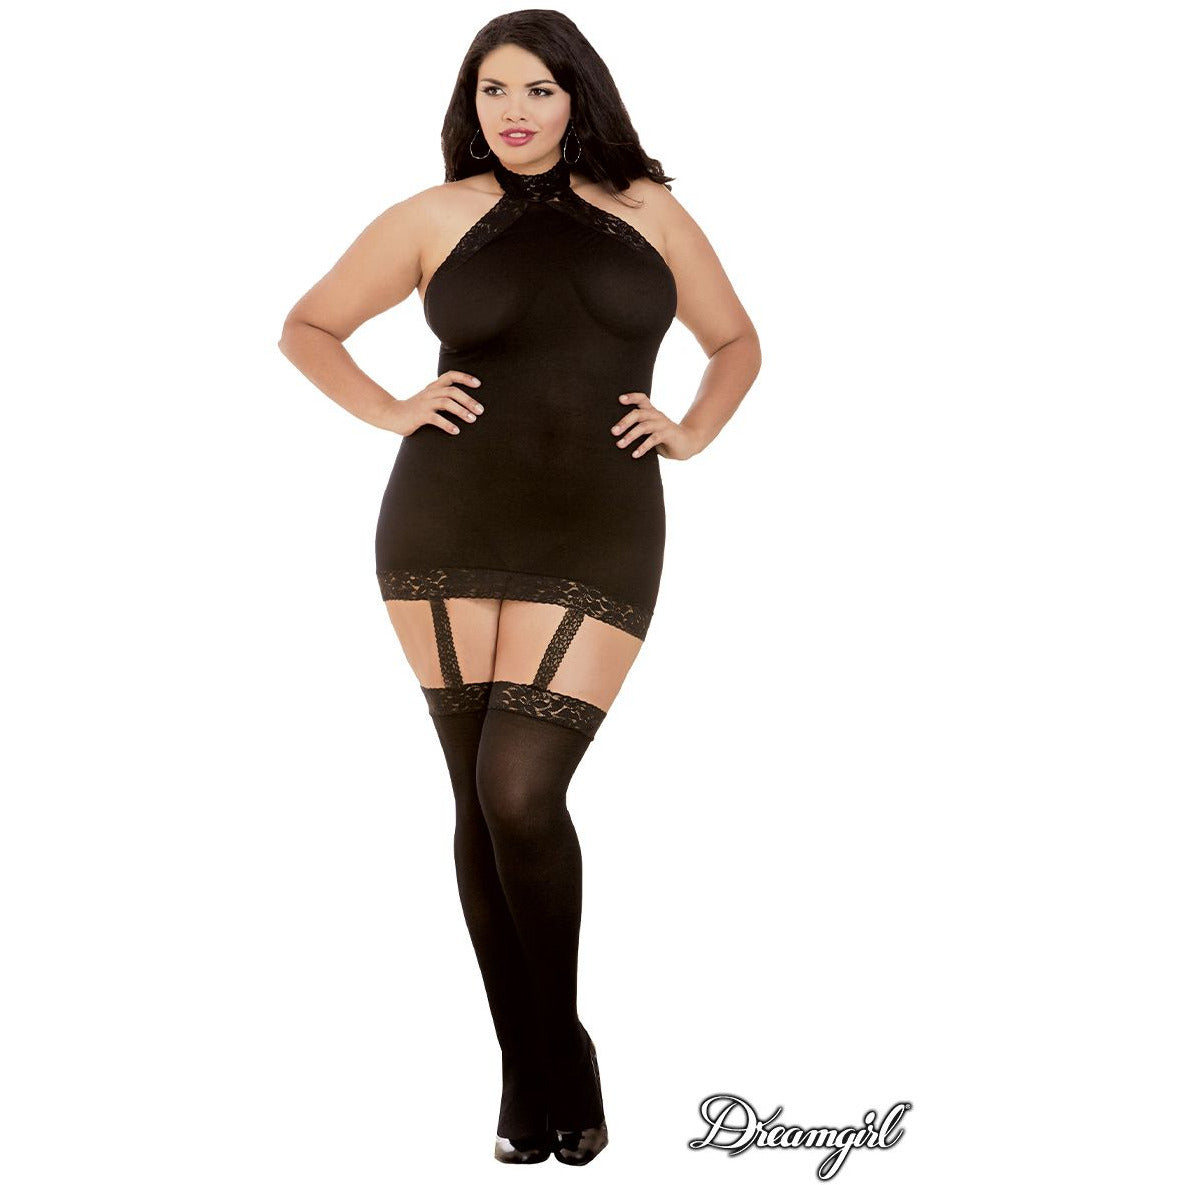 Sheer Garter Dress with Attached Thigh Highs by Dreamgirl